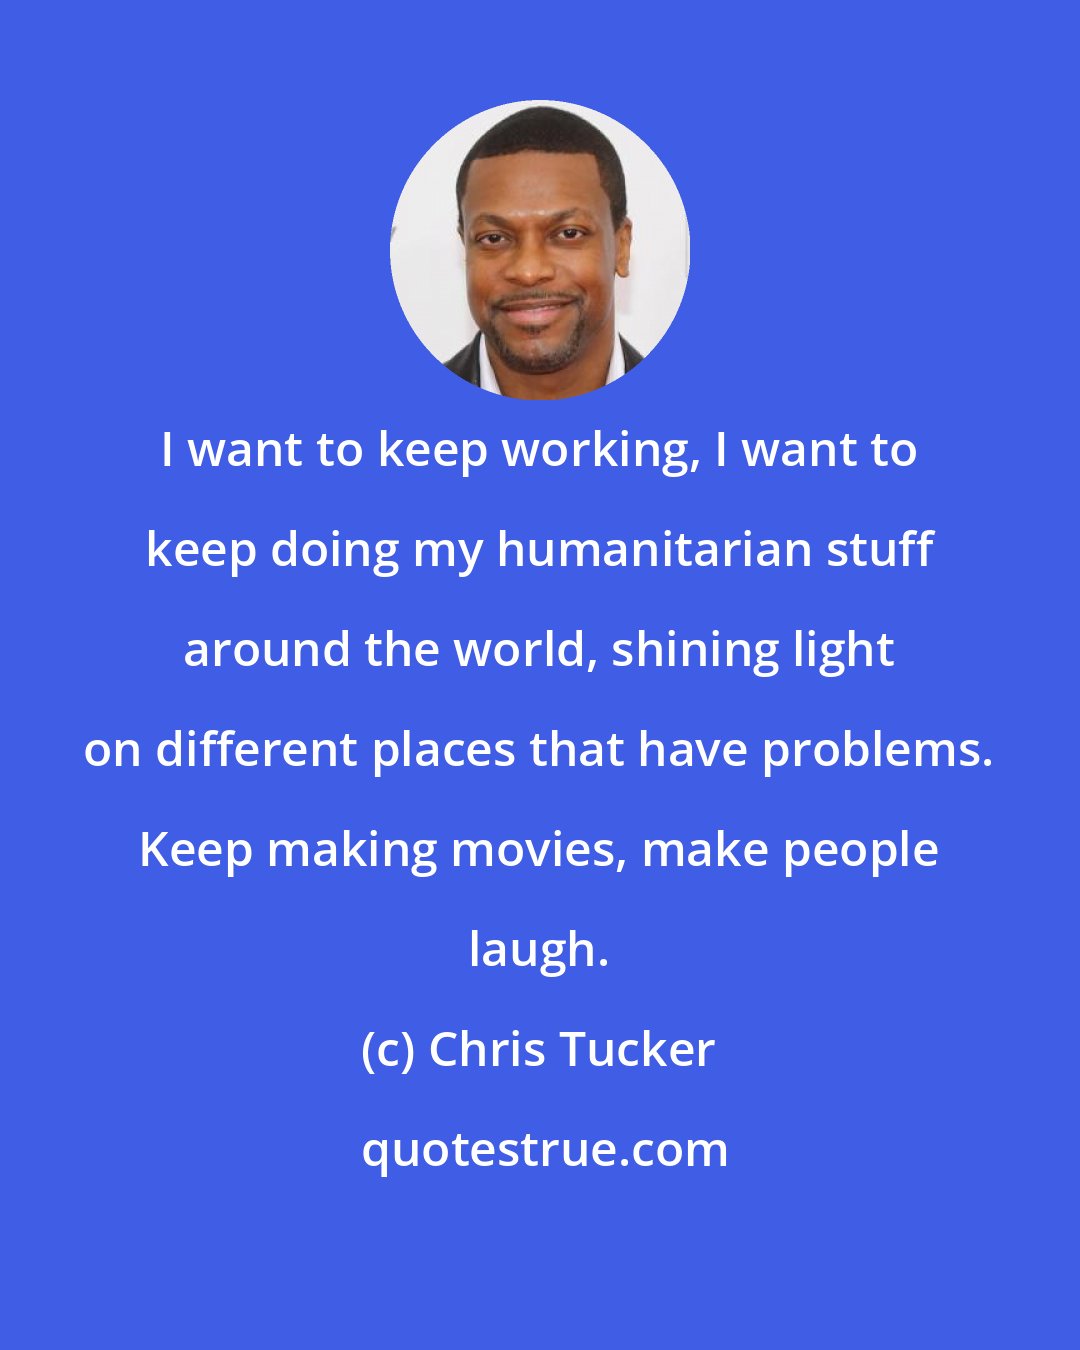 Chris Tucker: I want to keep working, I want to keep doing my humanitarian stuff around the world, shining light on different places that have problems. Keep making movies, make people laugh.